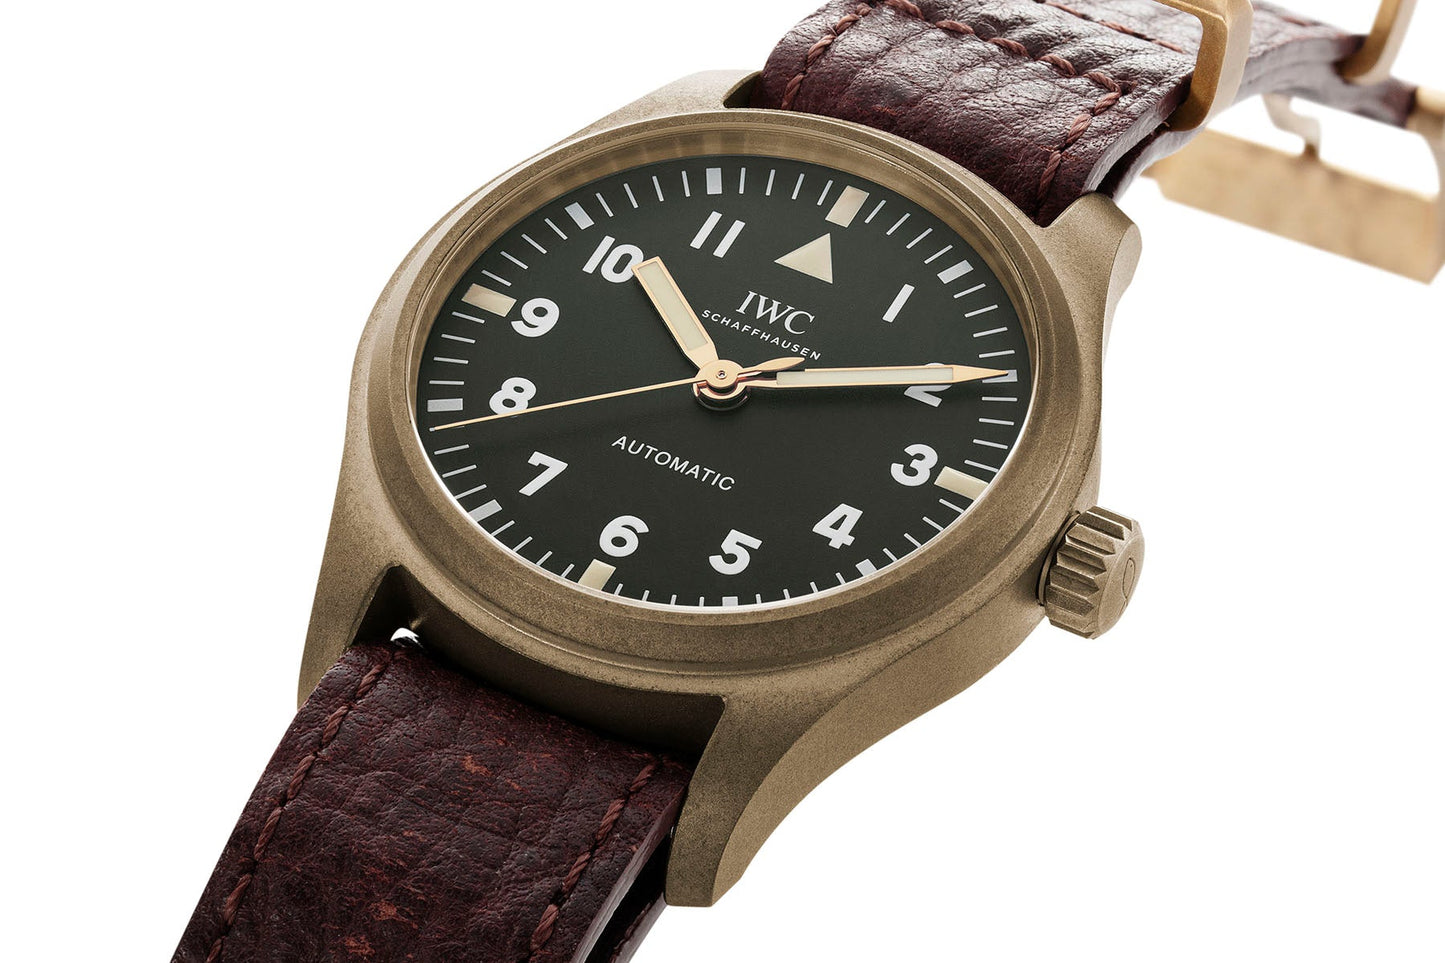 IWC Pilot's Watch Automatic 36mm Special Edition for The Rake and Revolution Test